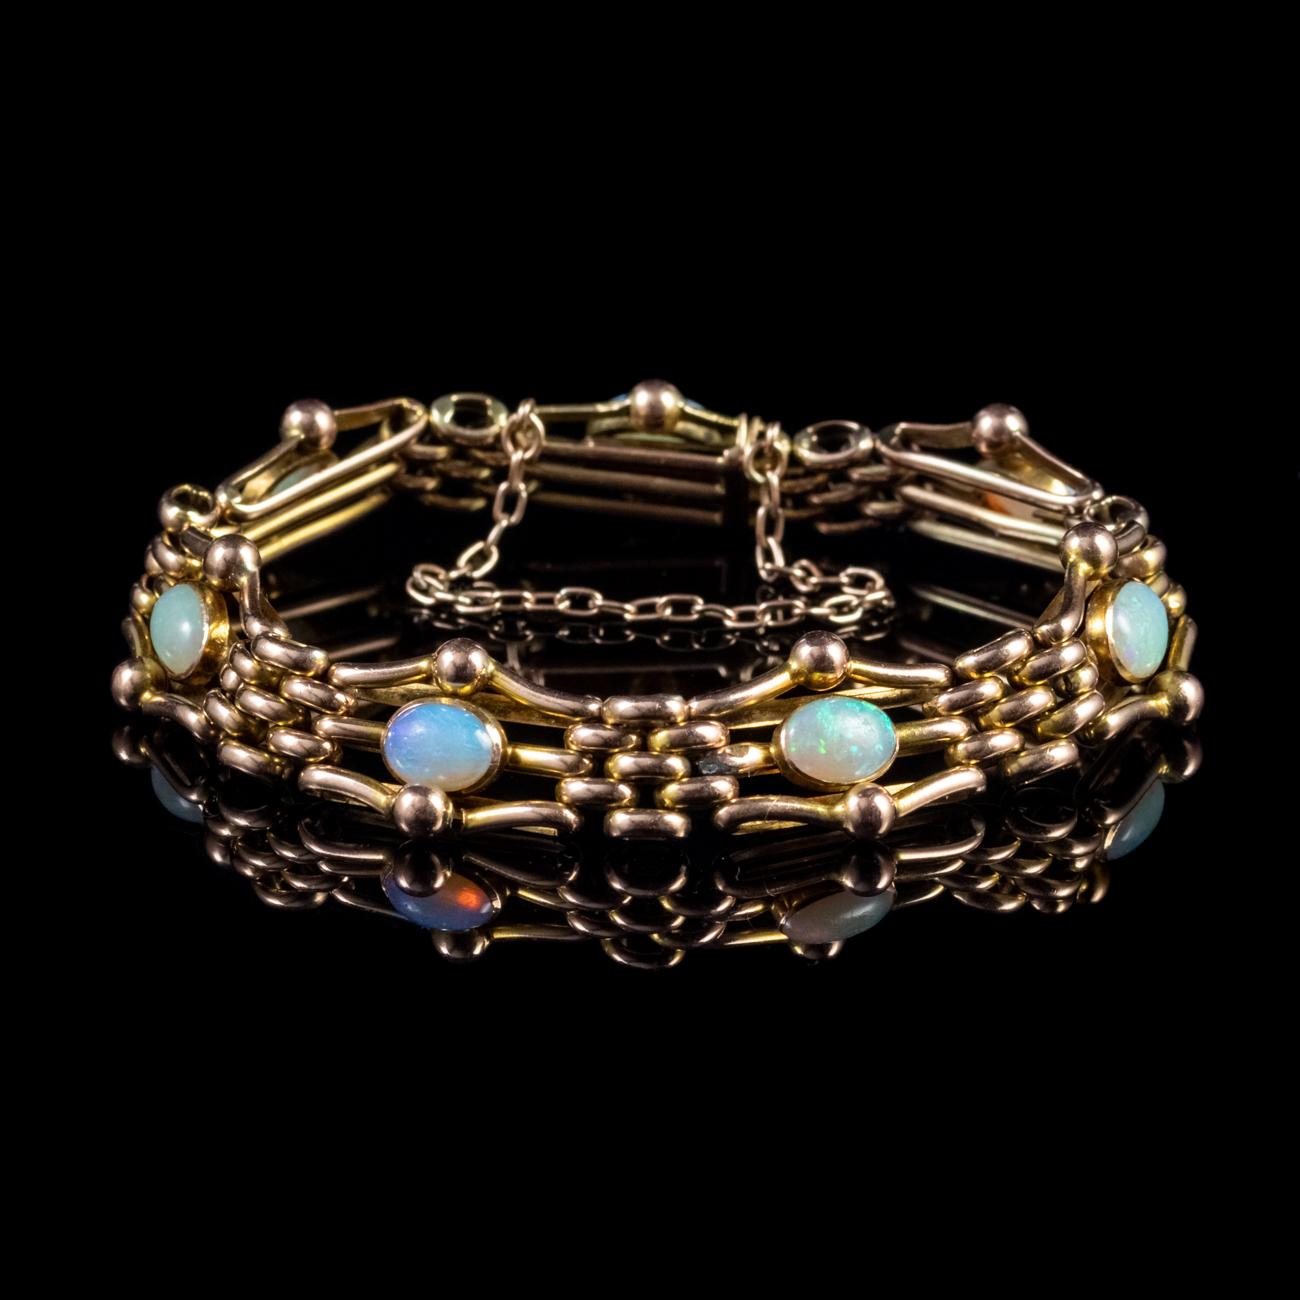 This beautiful Antique Victorian gate link bracelet has been modelled in 9ct Yellow Gold which has developed a lovely rose hue with age and is set with seven 0.80ct Opals which total 5.60ct. It features a box clasp and safety chain to keep it